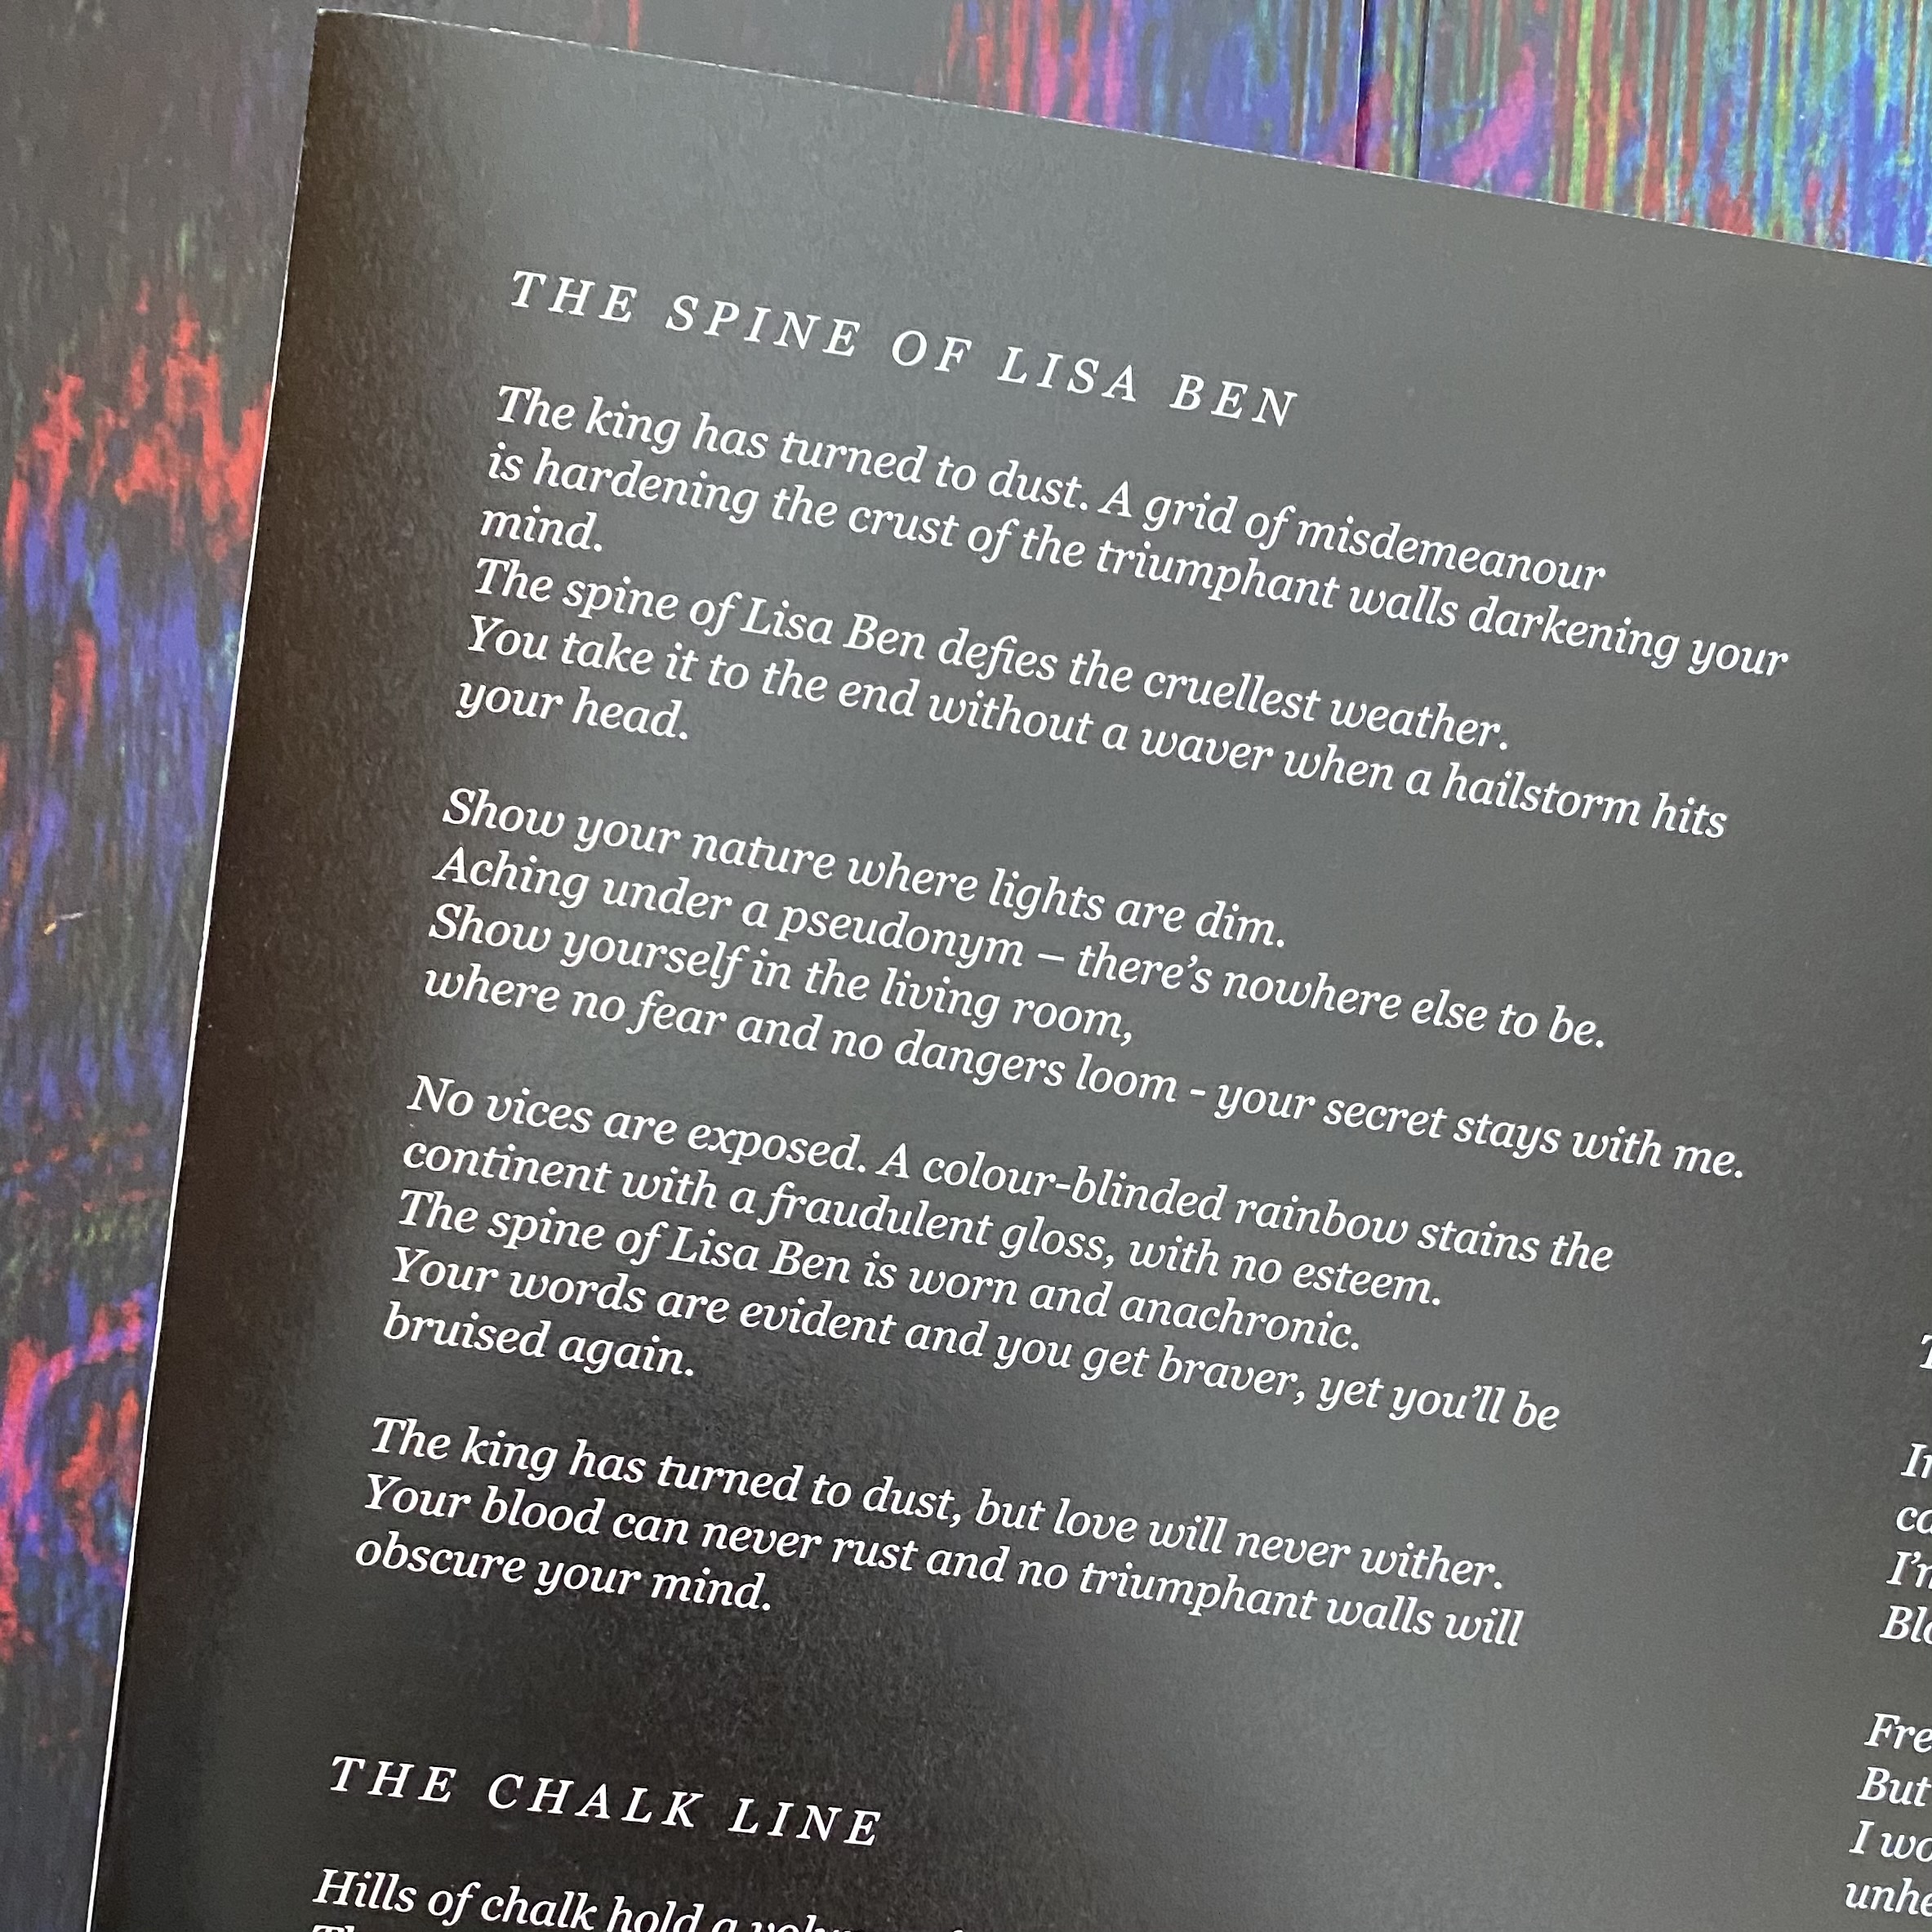 Image description: A photograph of the interior paper sleeve from the vinyl album "Sudden Anatomy," with the multicolored cardboard cover for the album in the background. The paper is black and the lyrics are printed in white italicized serif font. The lyrics are as follows:  The king has turned to dust. A grid of misdemeanour is hardening the crust of the triumphant walls darkening your mind. The spine of Lisa Ben defies the cruellest weather. You take it to the end without a waver when a hailstorm hits your head.  Show your nature where lights are dim. Aching under a psudonym — there's nowhere else to be. Show yourself in the living room, where no fear and no dangers loom — your secret stays with me.  No vices are exposed. A colour-blinded rainbow stains the  continent with a fraudulent gloss, with no esteem. The spine of Lisa Ben is worn and anachronic. Your words are evident and you get braver, yet you'll be bruised again.  The king has turned to dust, but love with never wither.  Your blood can never rust and no triumphant walls will obscure your mind.